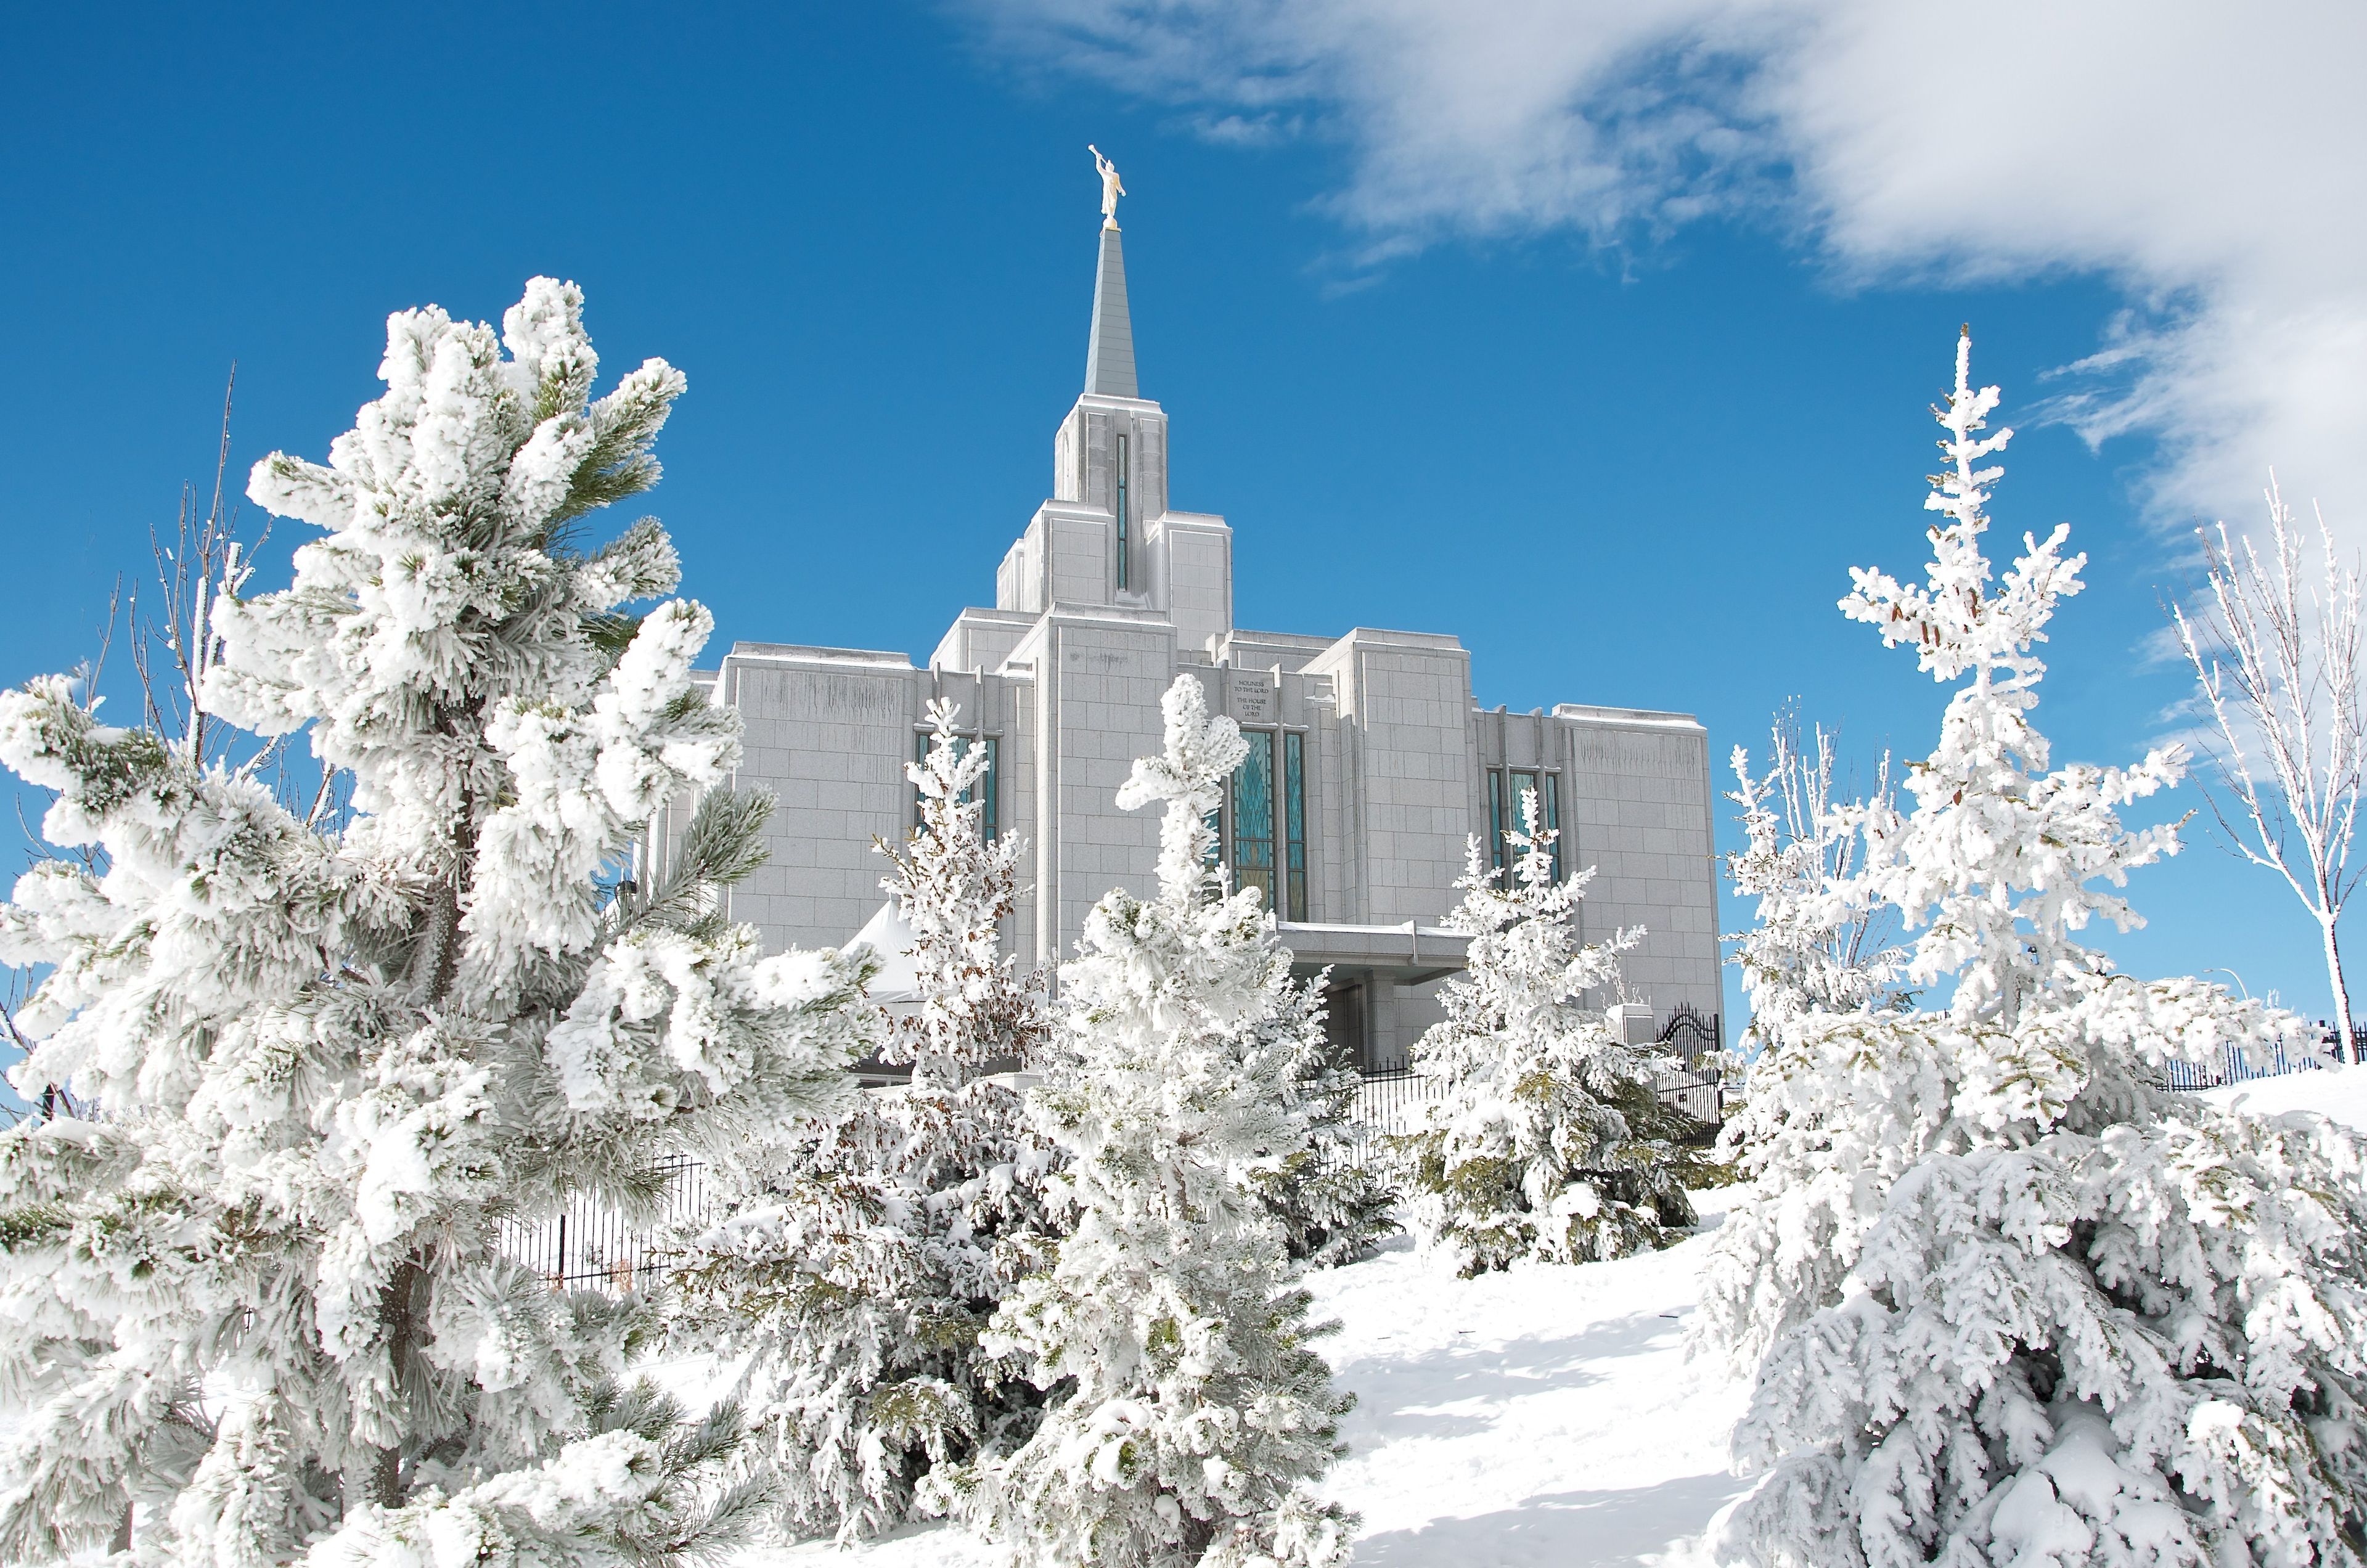 The Calgary Alberta Temple is covered in snow during the winter.